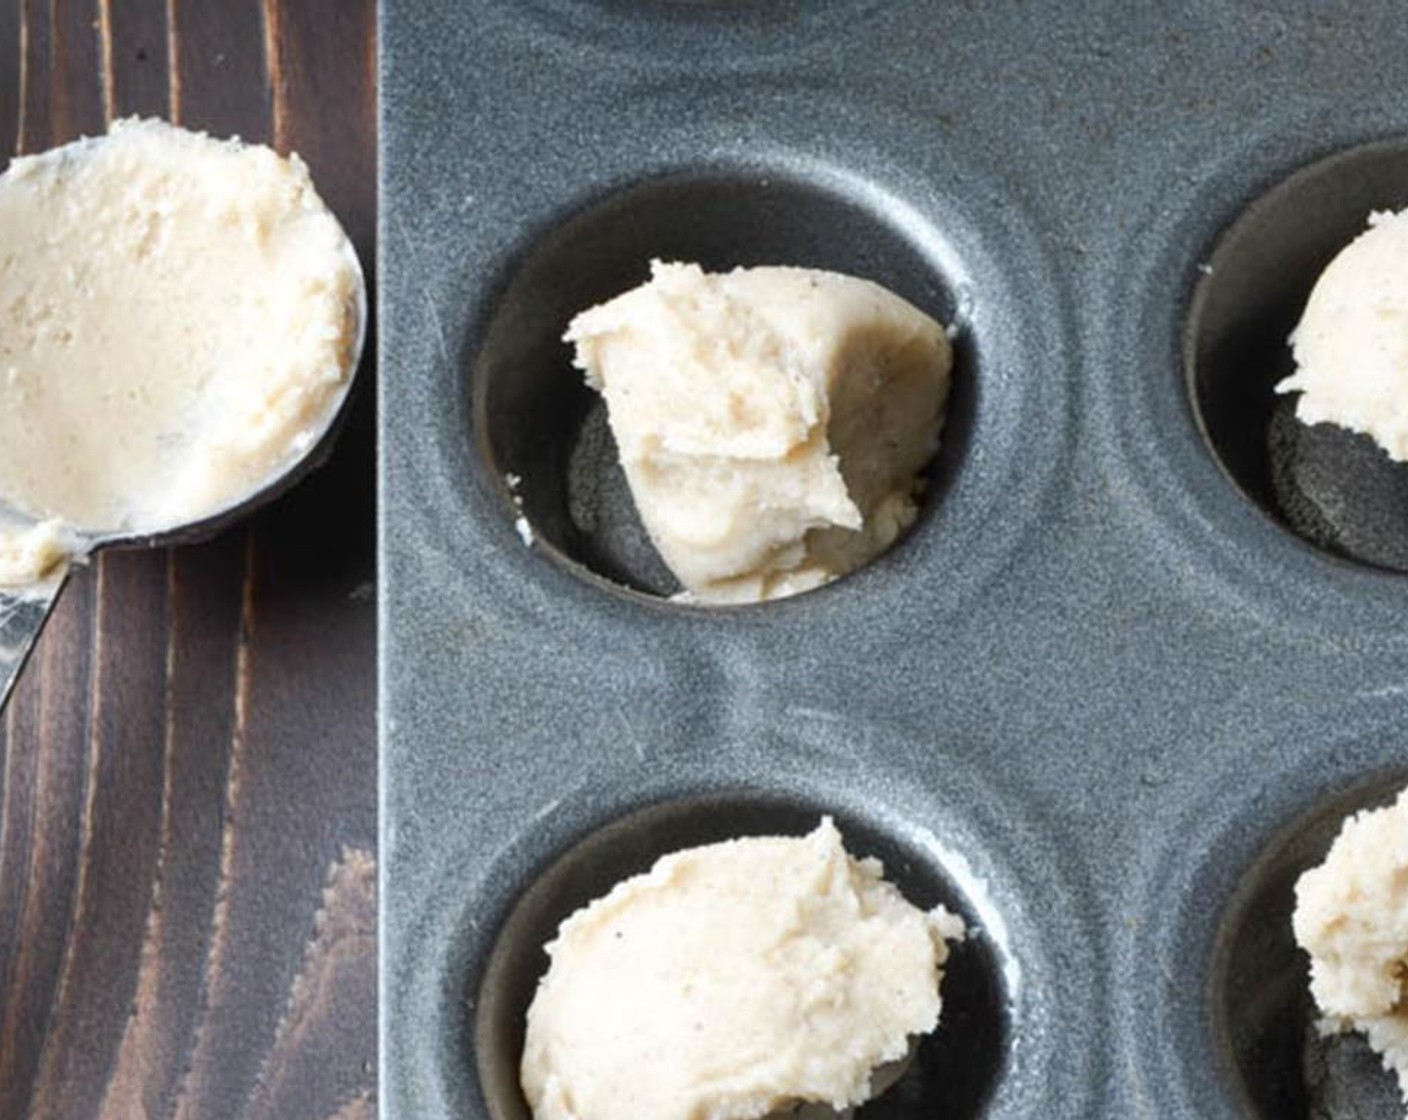 step 7 Scoop 1 level tablespoon of dough into each muffin tin. Use floured dough tamper, to tamp the dough into the muffin tin to form little shells. Refrigerate for 10-15 minutes until chilled.